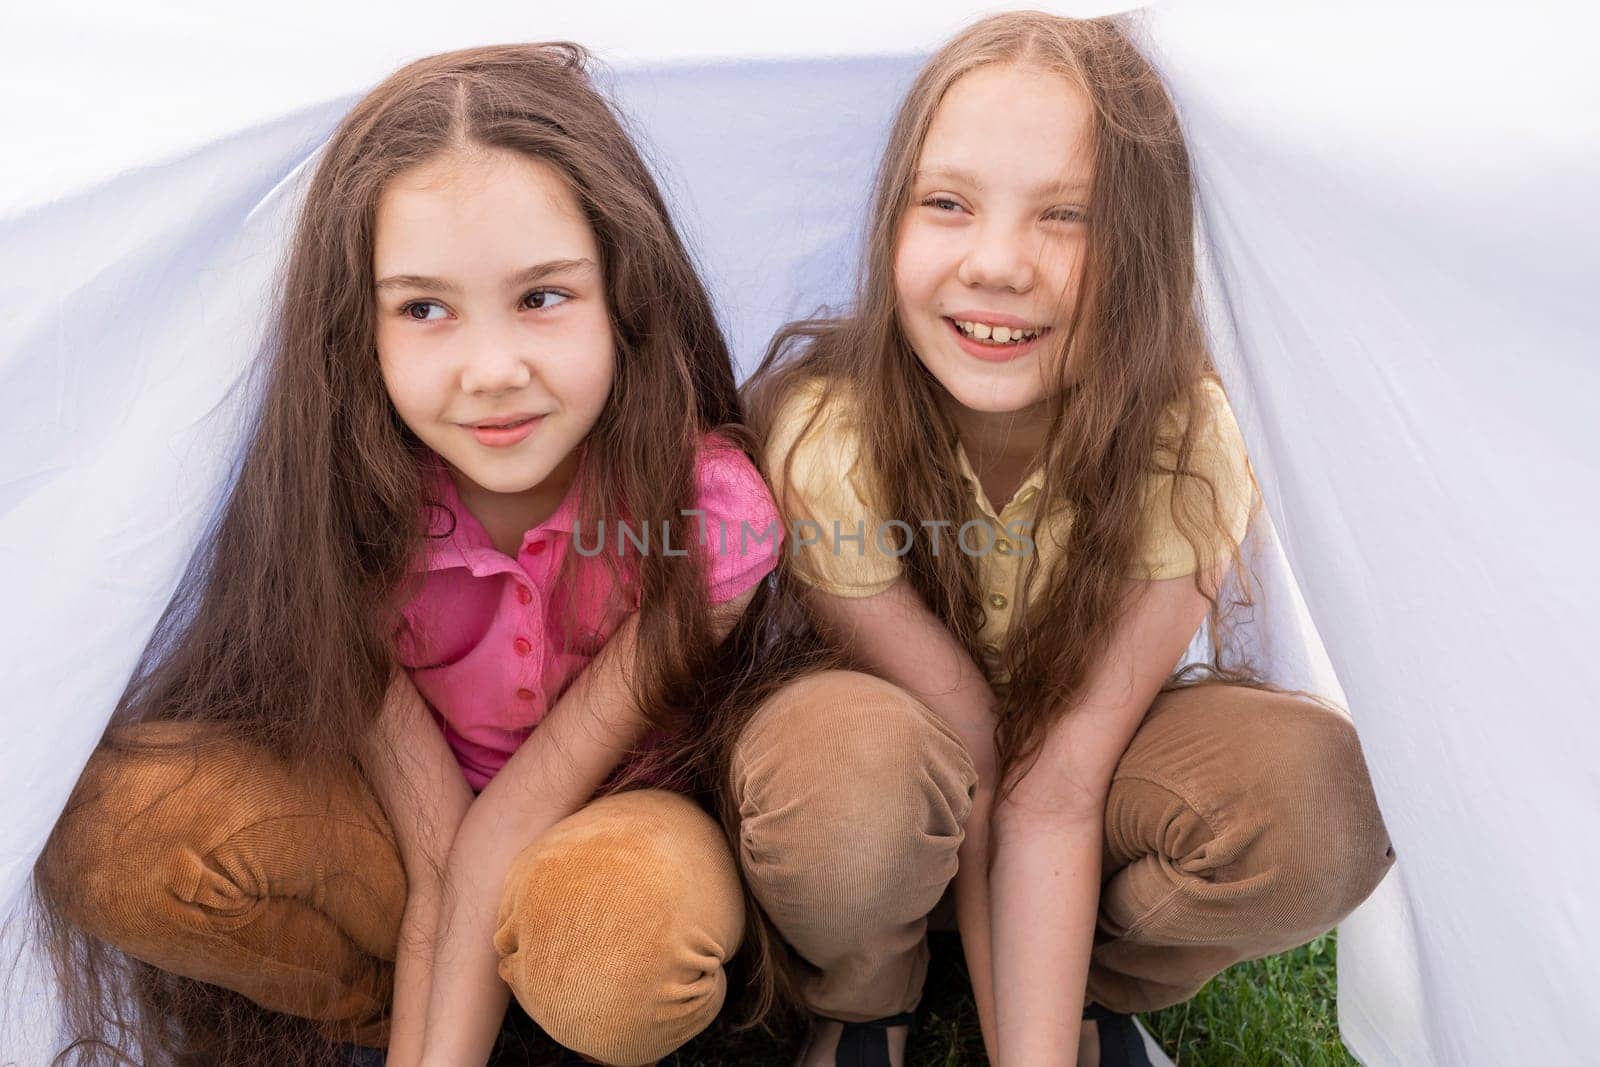 Two Cute Little Sisters With Long Hair Sits Under White Sheet On Grass in Meadow. Caucasian Asian Siblings Have Fun, Joy Together. Full Family, True Friendship. Horizontal Plane. High quality photo